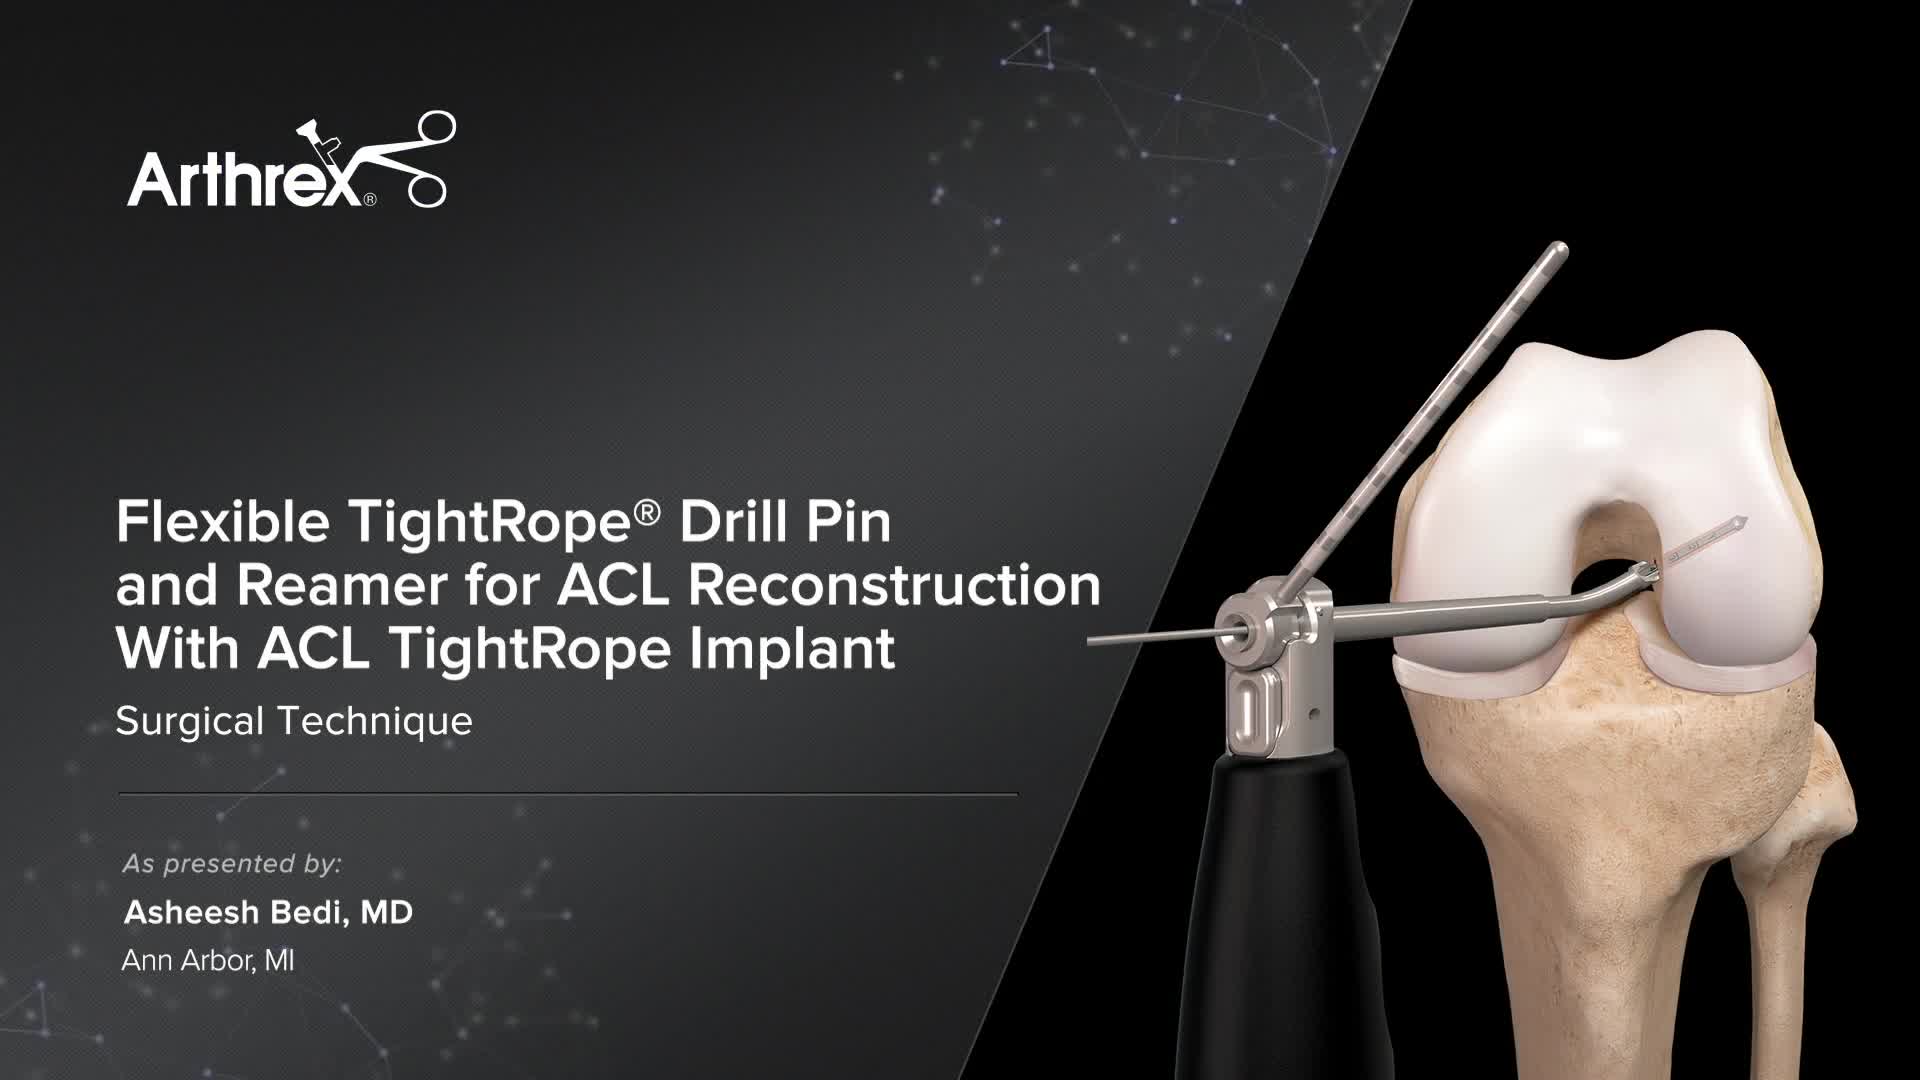 Arthrex - Flexible TightRope® Drill Pin and Reamer for ACL